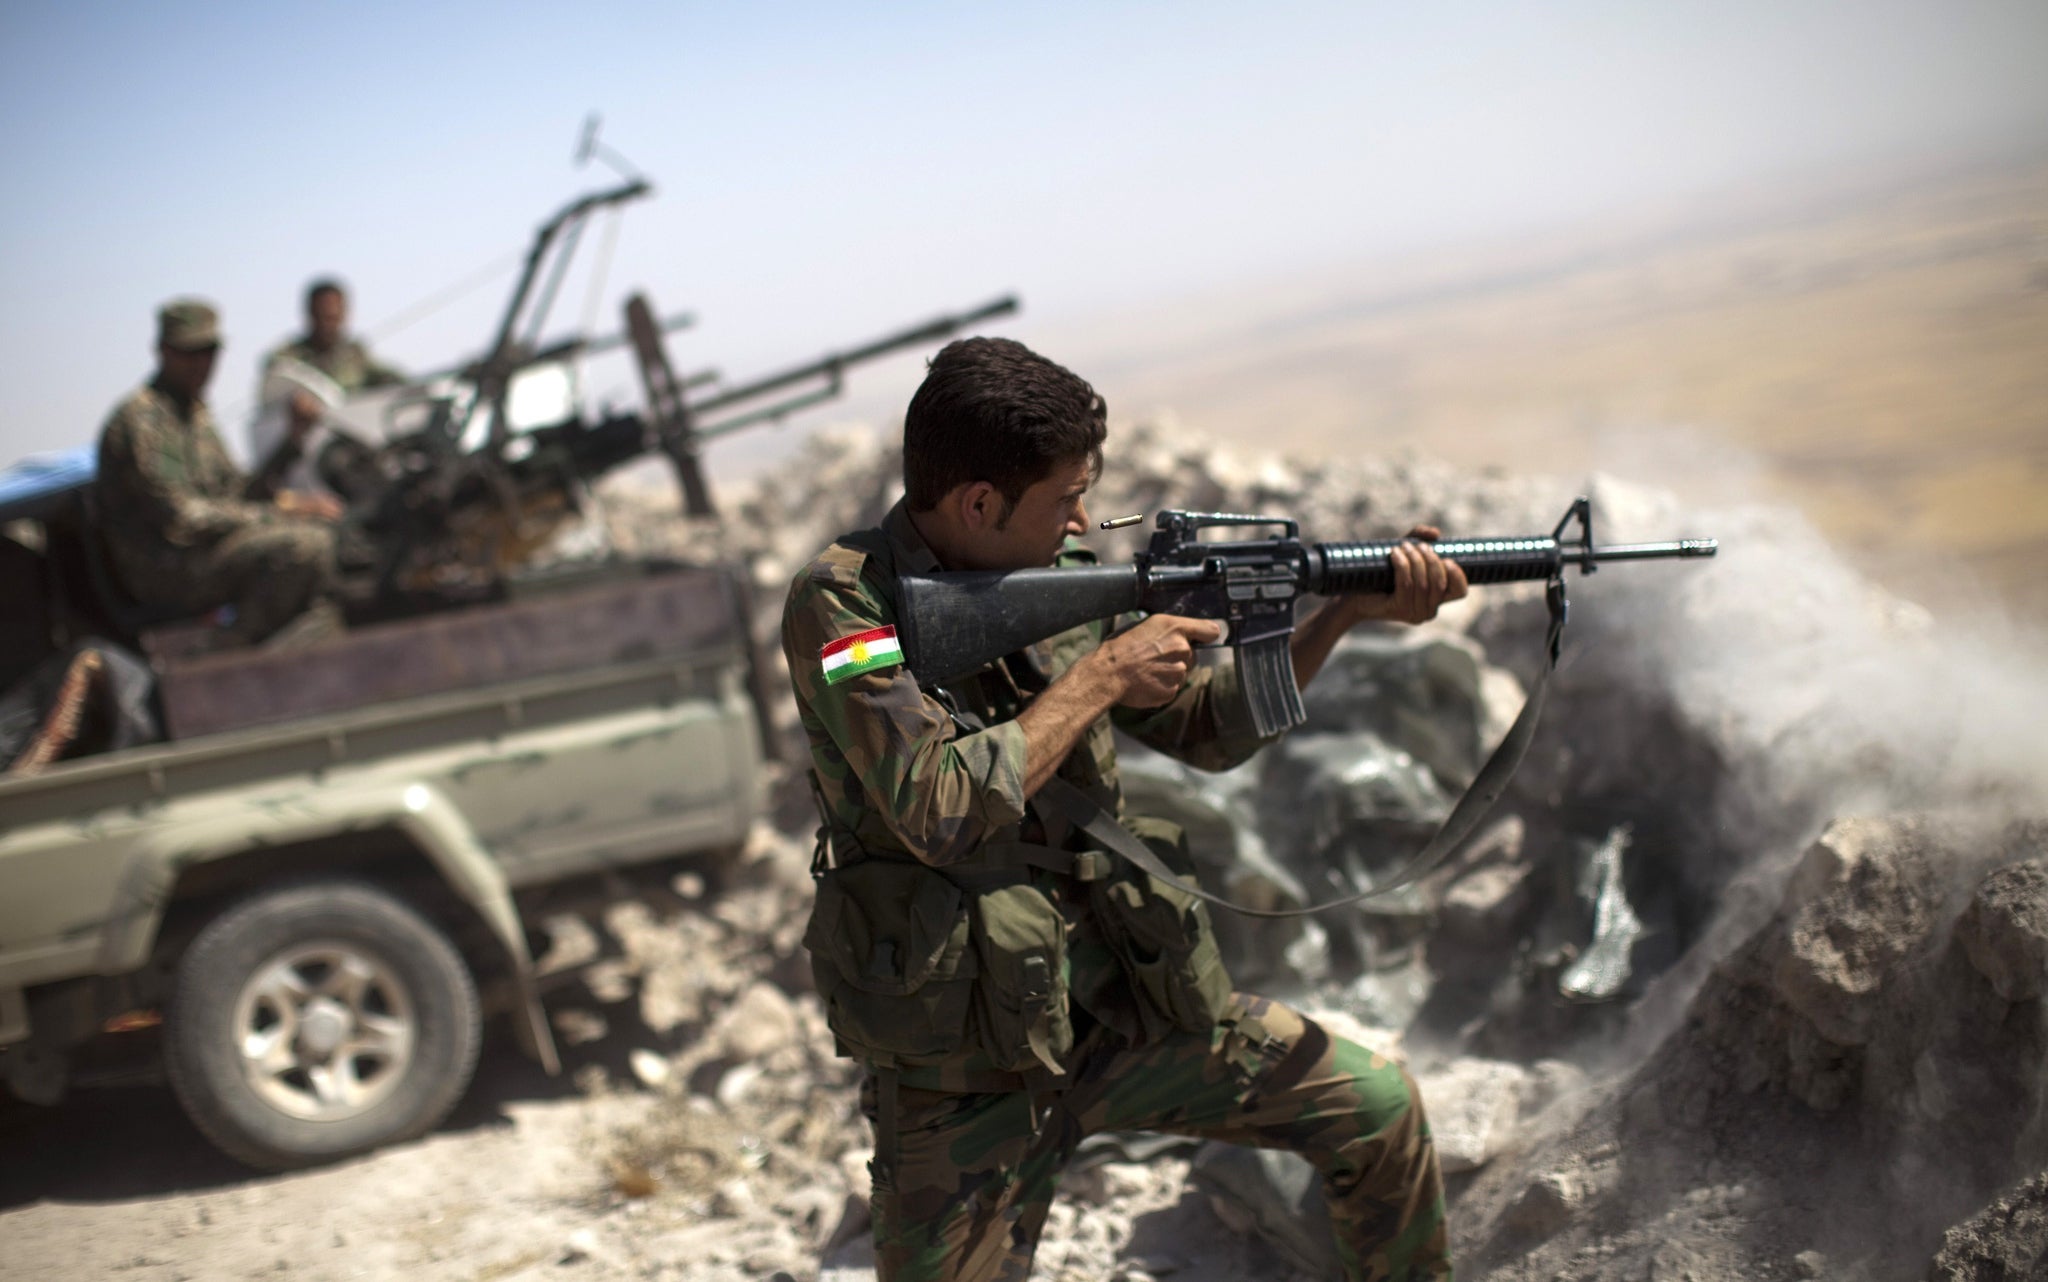 A Peshmerga fighter fires at an Isis position in Iraq. Kurdish officials claim that Isis has previously used chlorine gas against Peshmerga fighters.